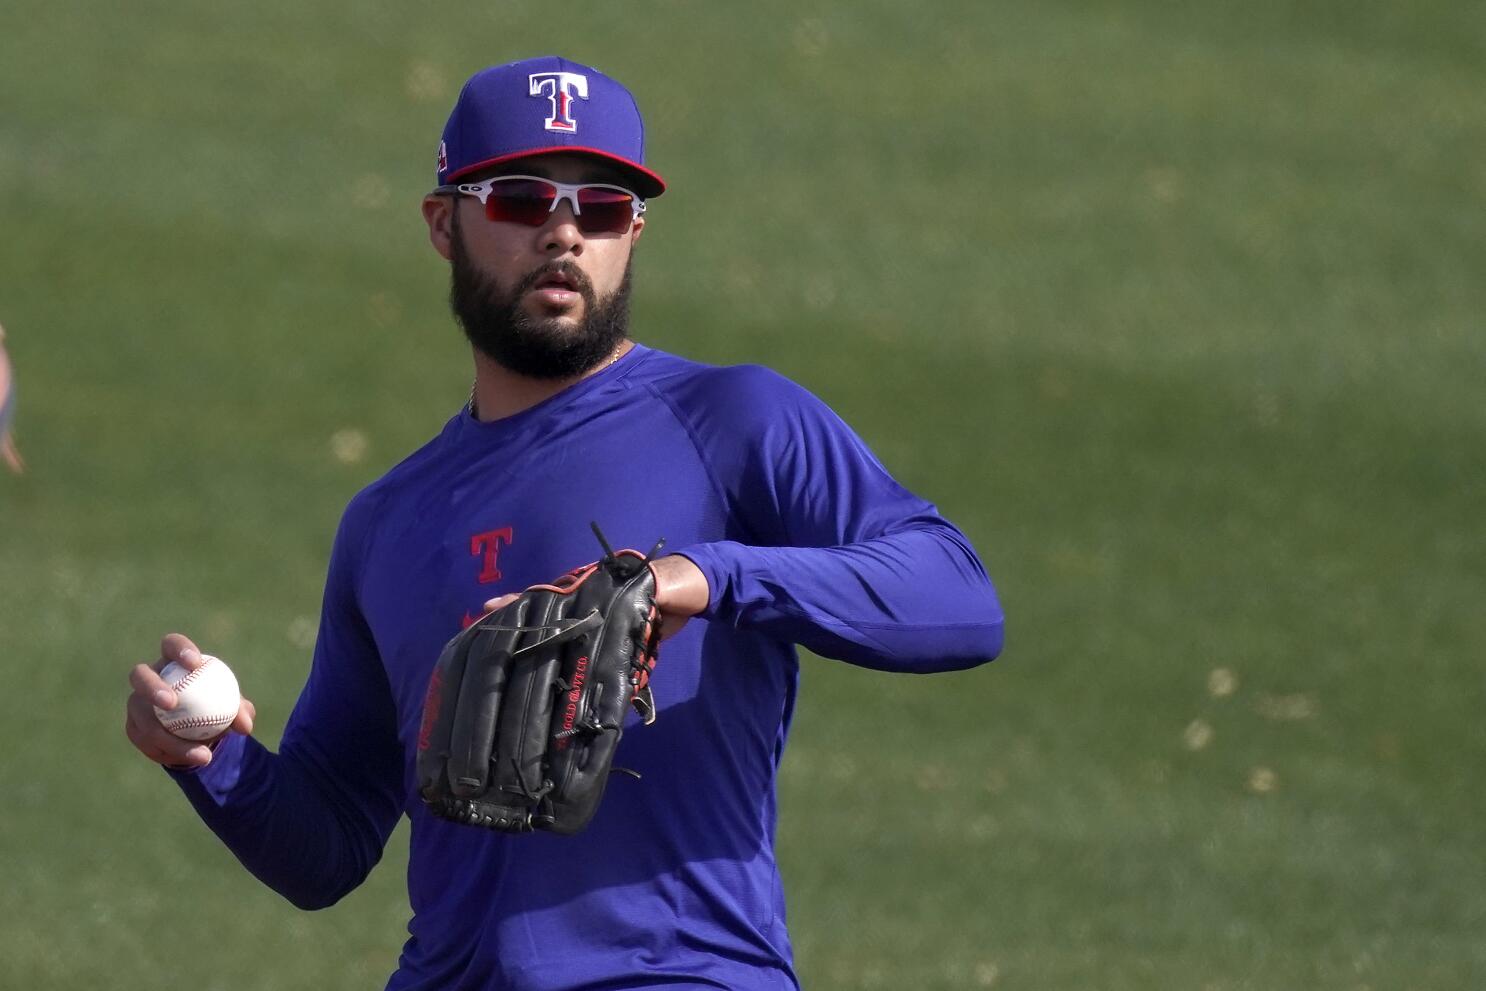 Elvis Andrus leading by example